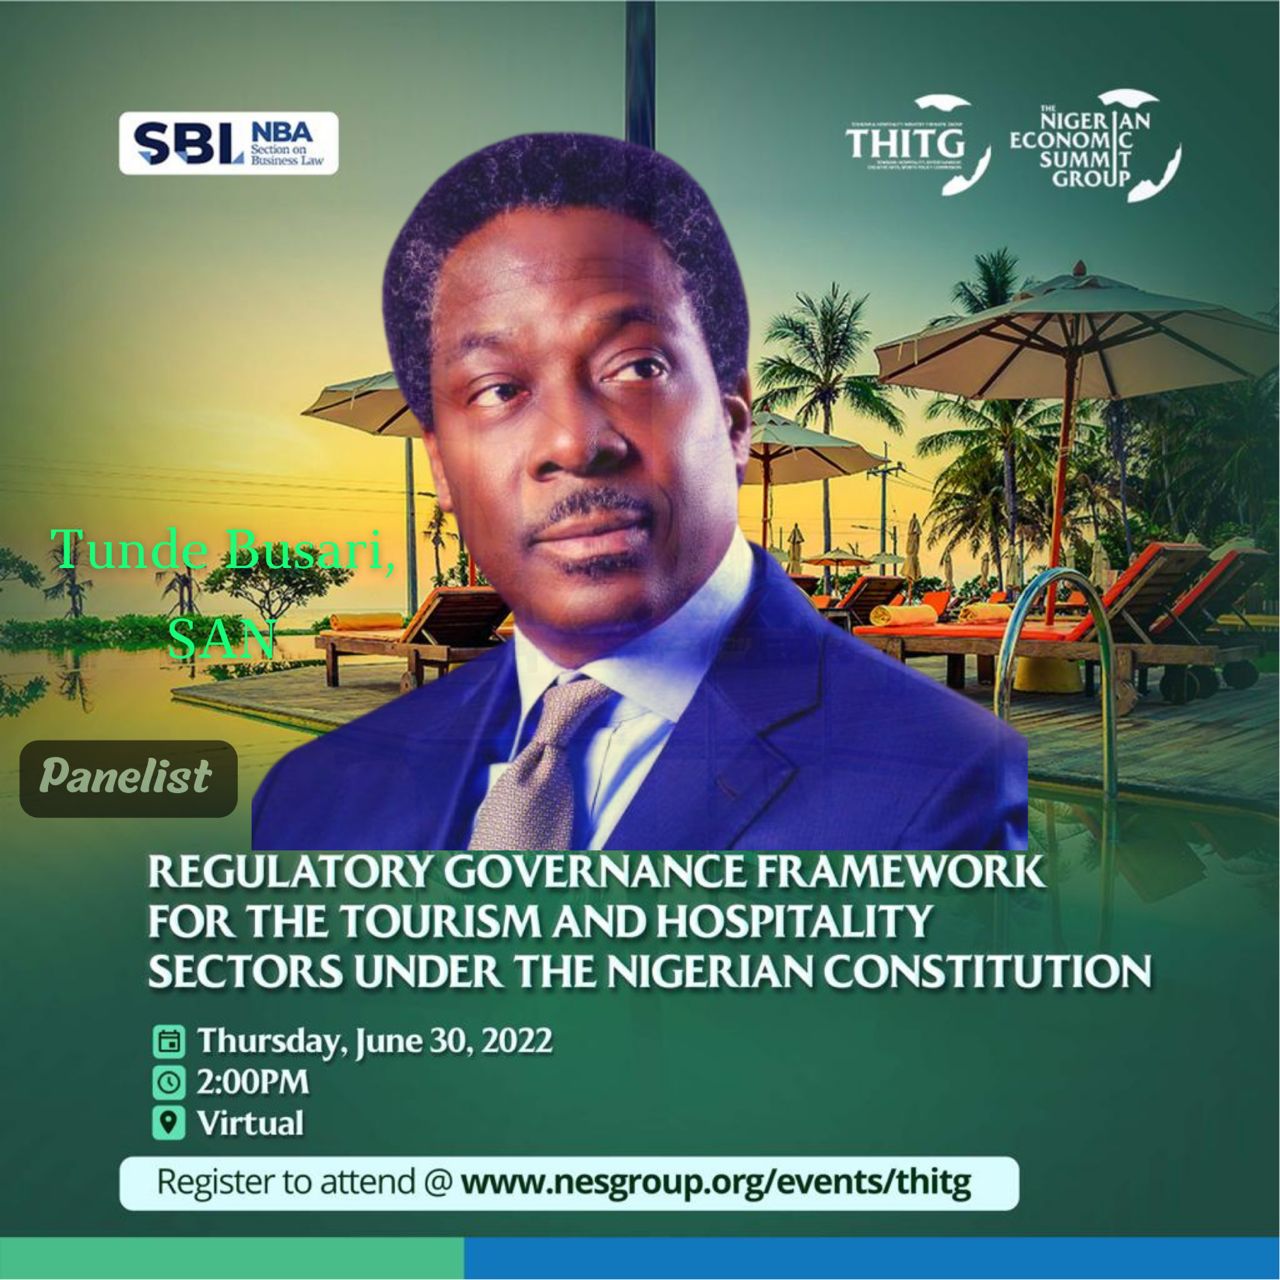 You are currently viewing Our Partner Tunde Busari, SAN, FCIS, FCIArb was a panelist at the webinar organised by the Tourism and Hospitality Industries Thematic group of the NESG in collaboration with the NBA SBL